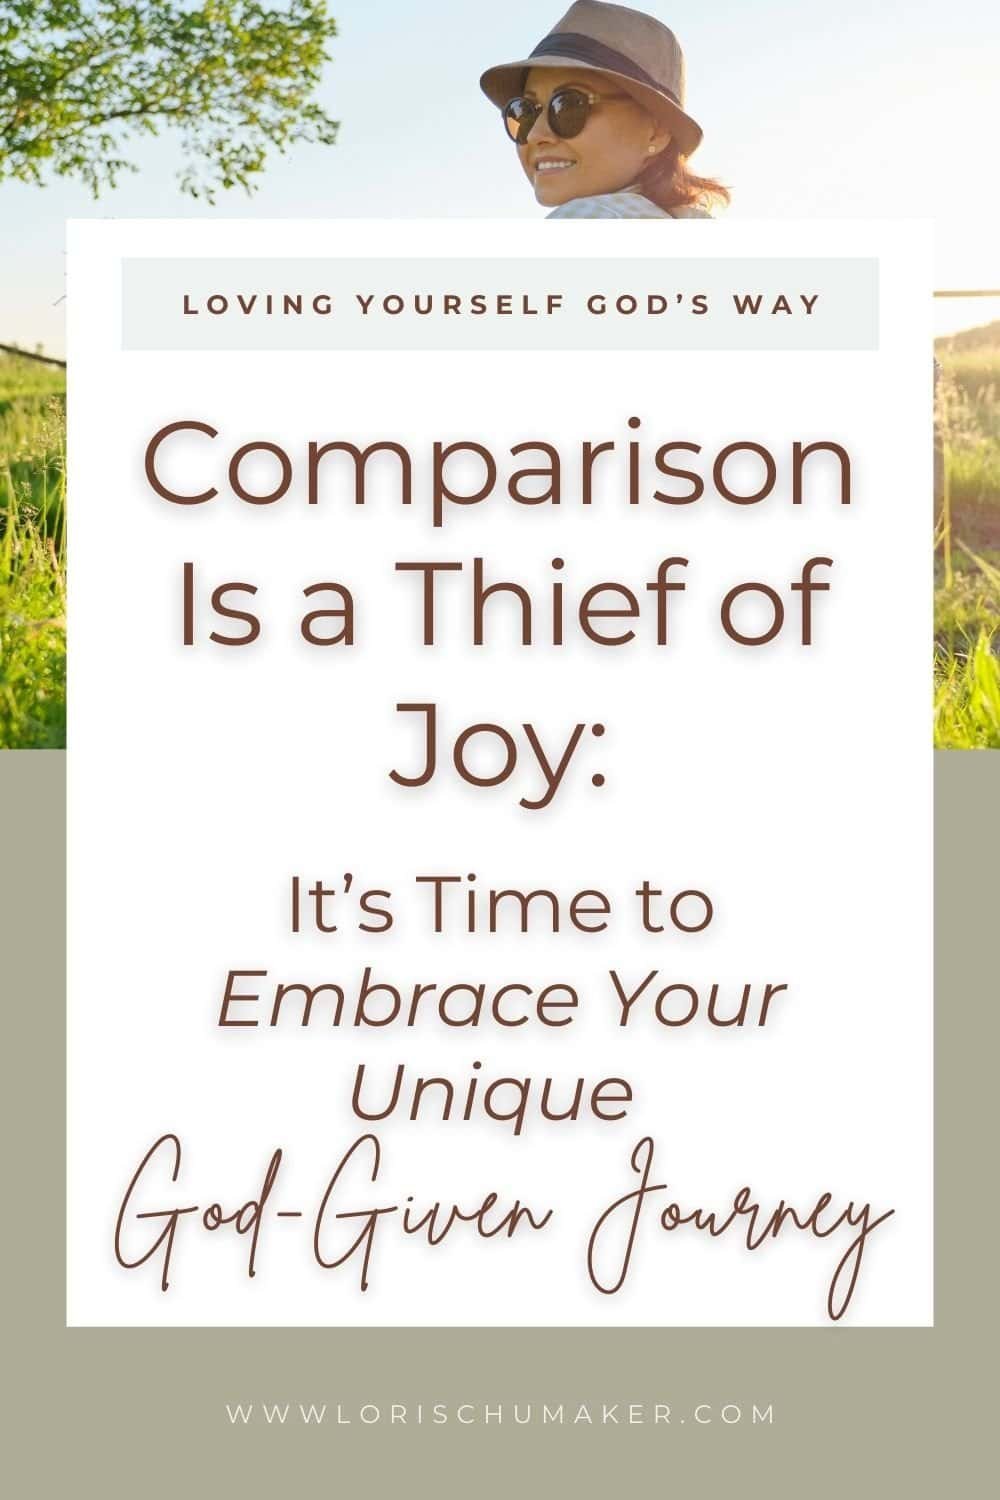 Explore why comparison is a thief of joy and learn how embracing your unique God-given journey can lead to lasting happiness and fulfillment. Turn to these Bible verses as resources as well as a list of critical strategies to help you break free of the shackles unhelpful comparison has placed on your life.  